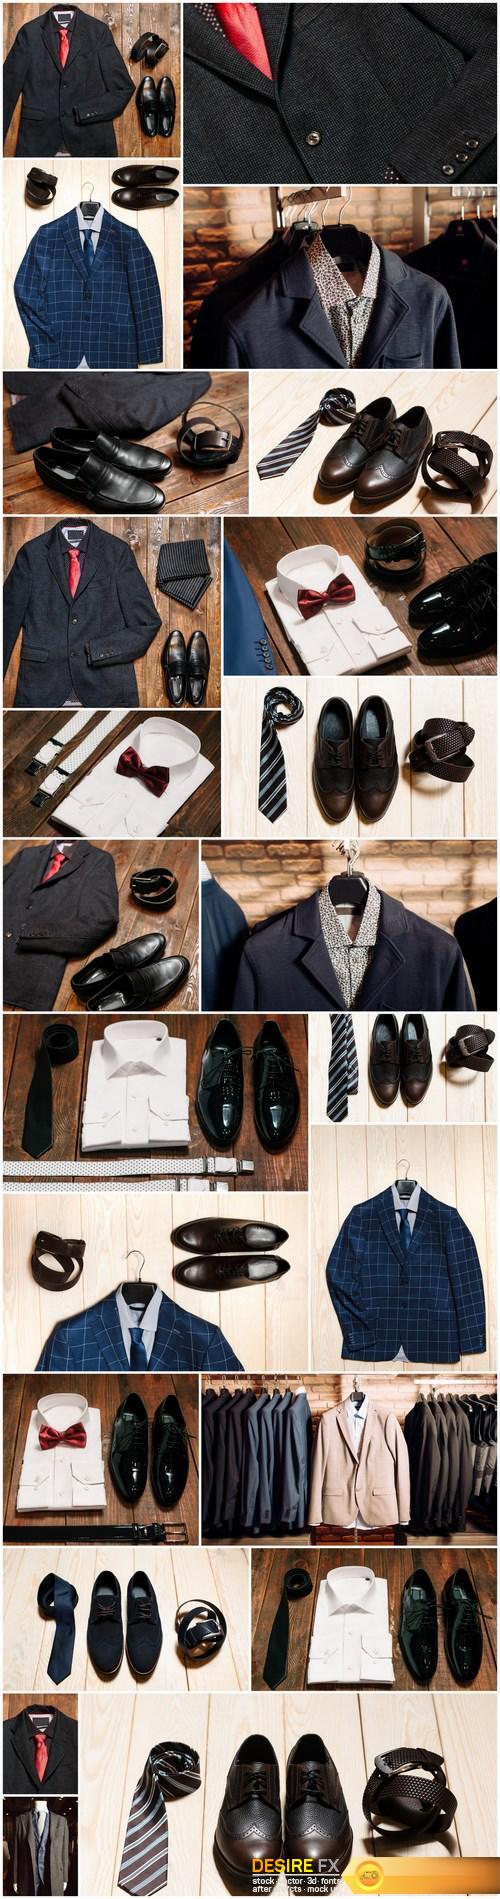 Men's Clothing and Accessories 2 - 23xUHQ JPEG Photo Stock